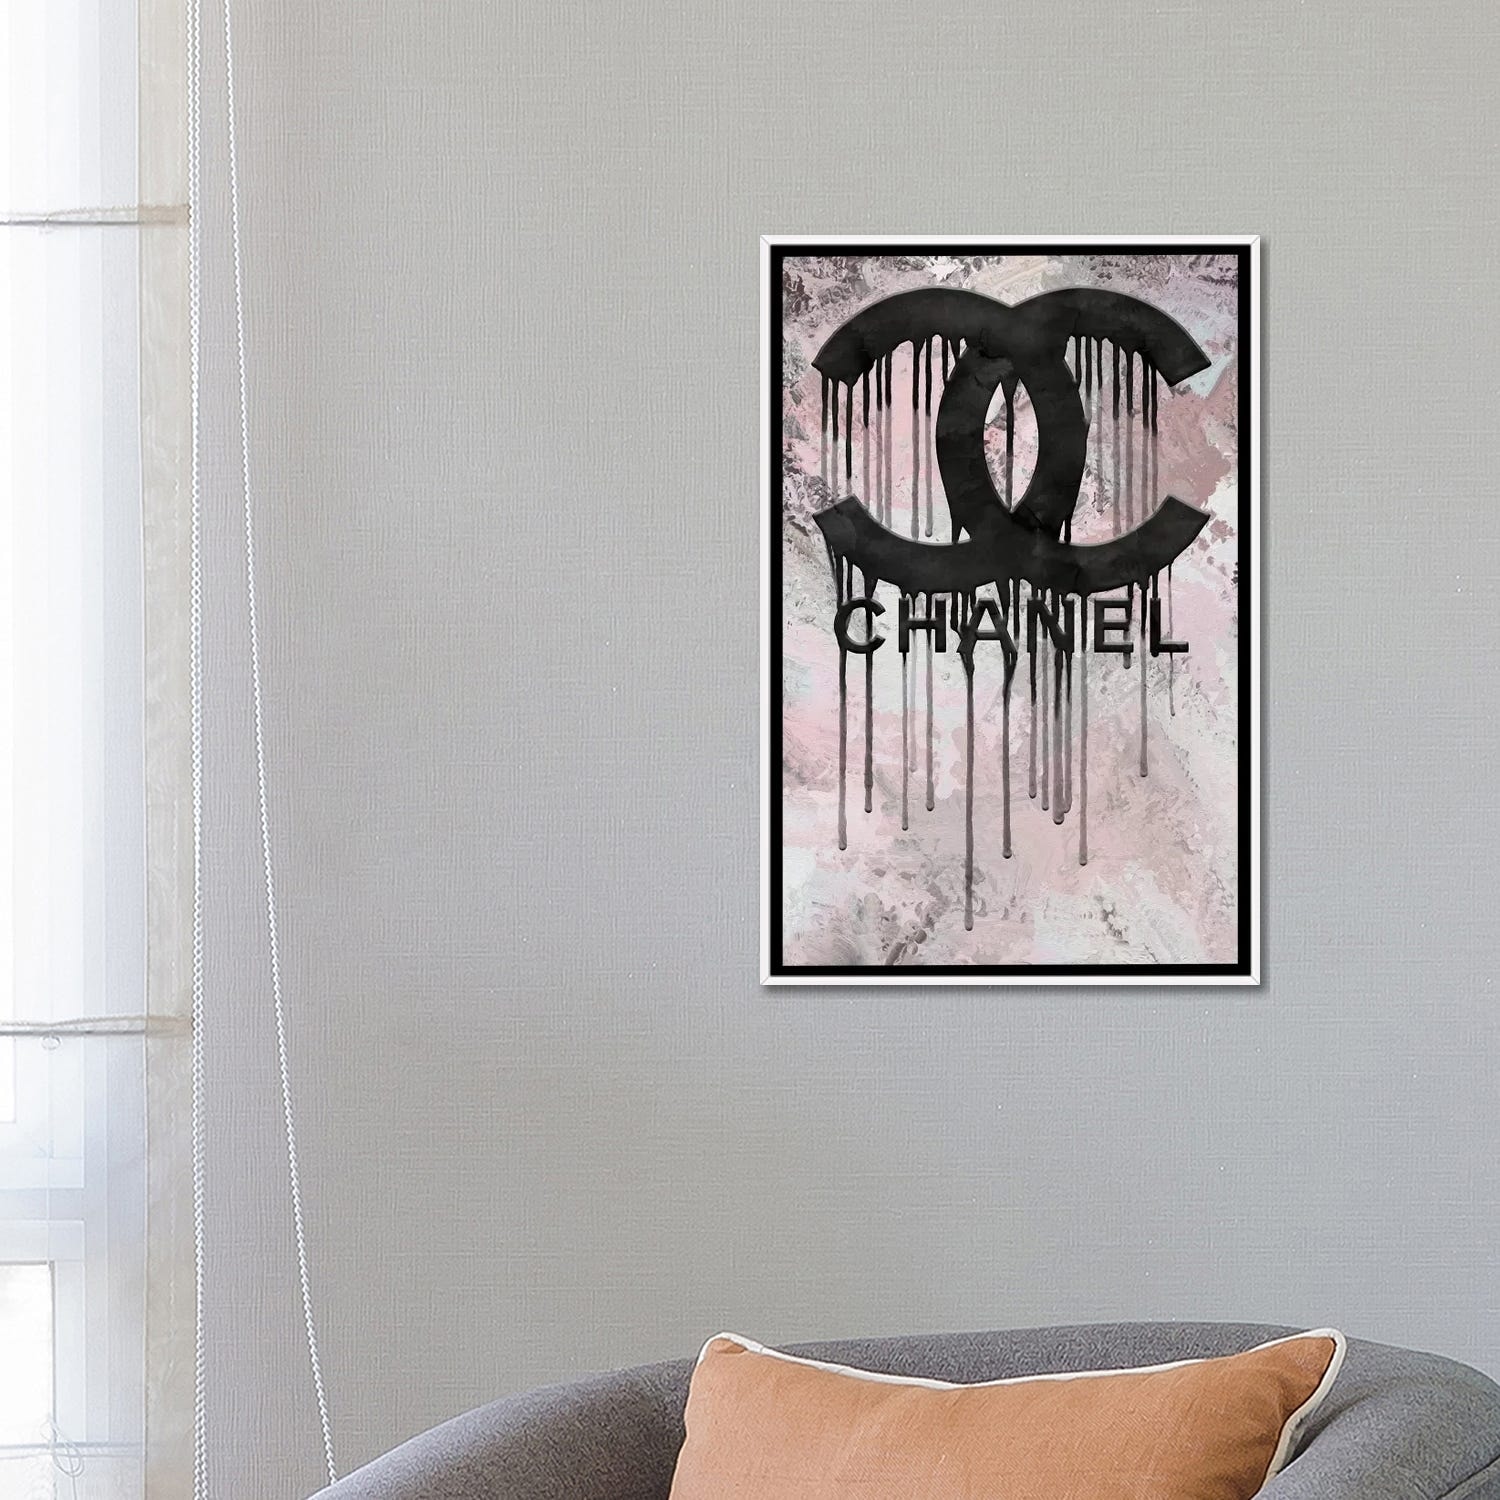 Grunged and Dripping LV Canvas Print Wall Art by Pomaikai Barron